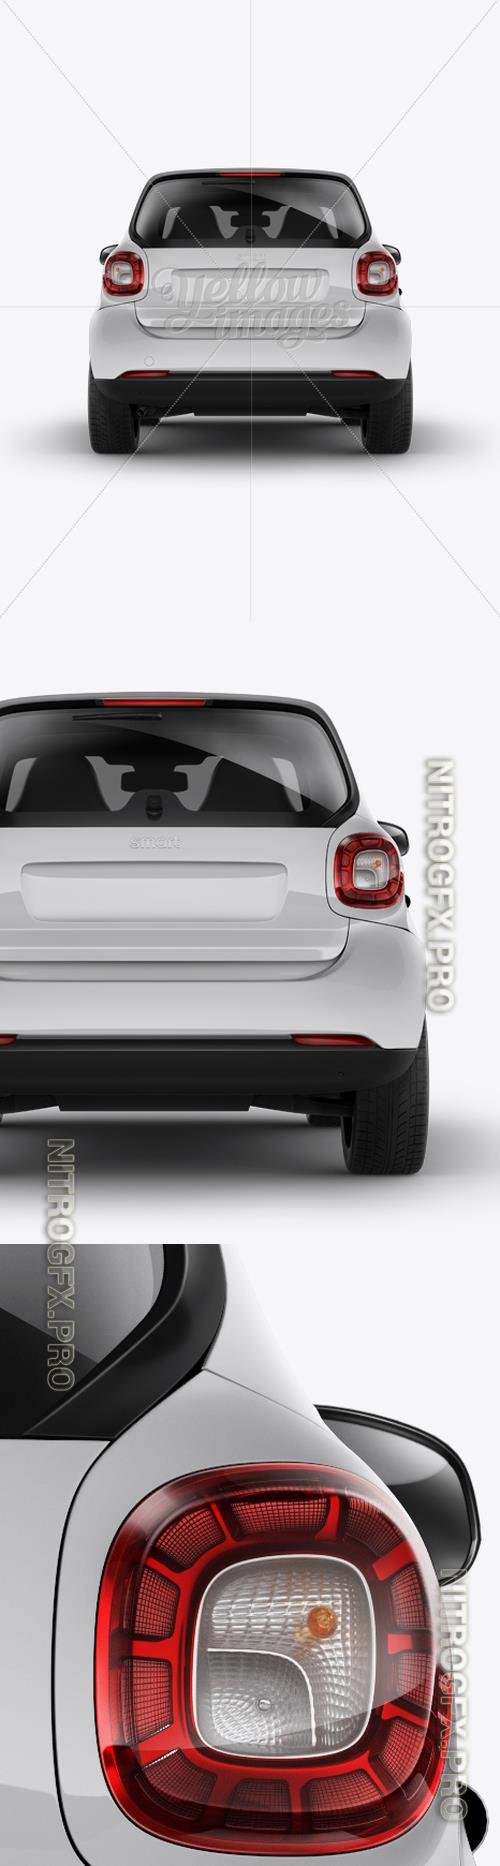 Smart Fortwo Mockup - Back View - 14064